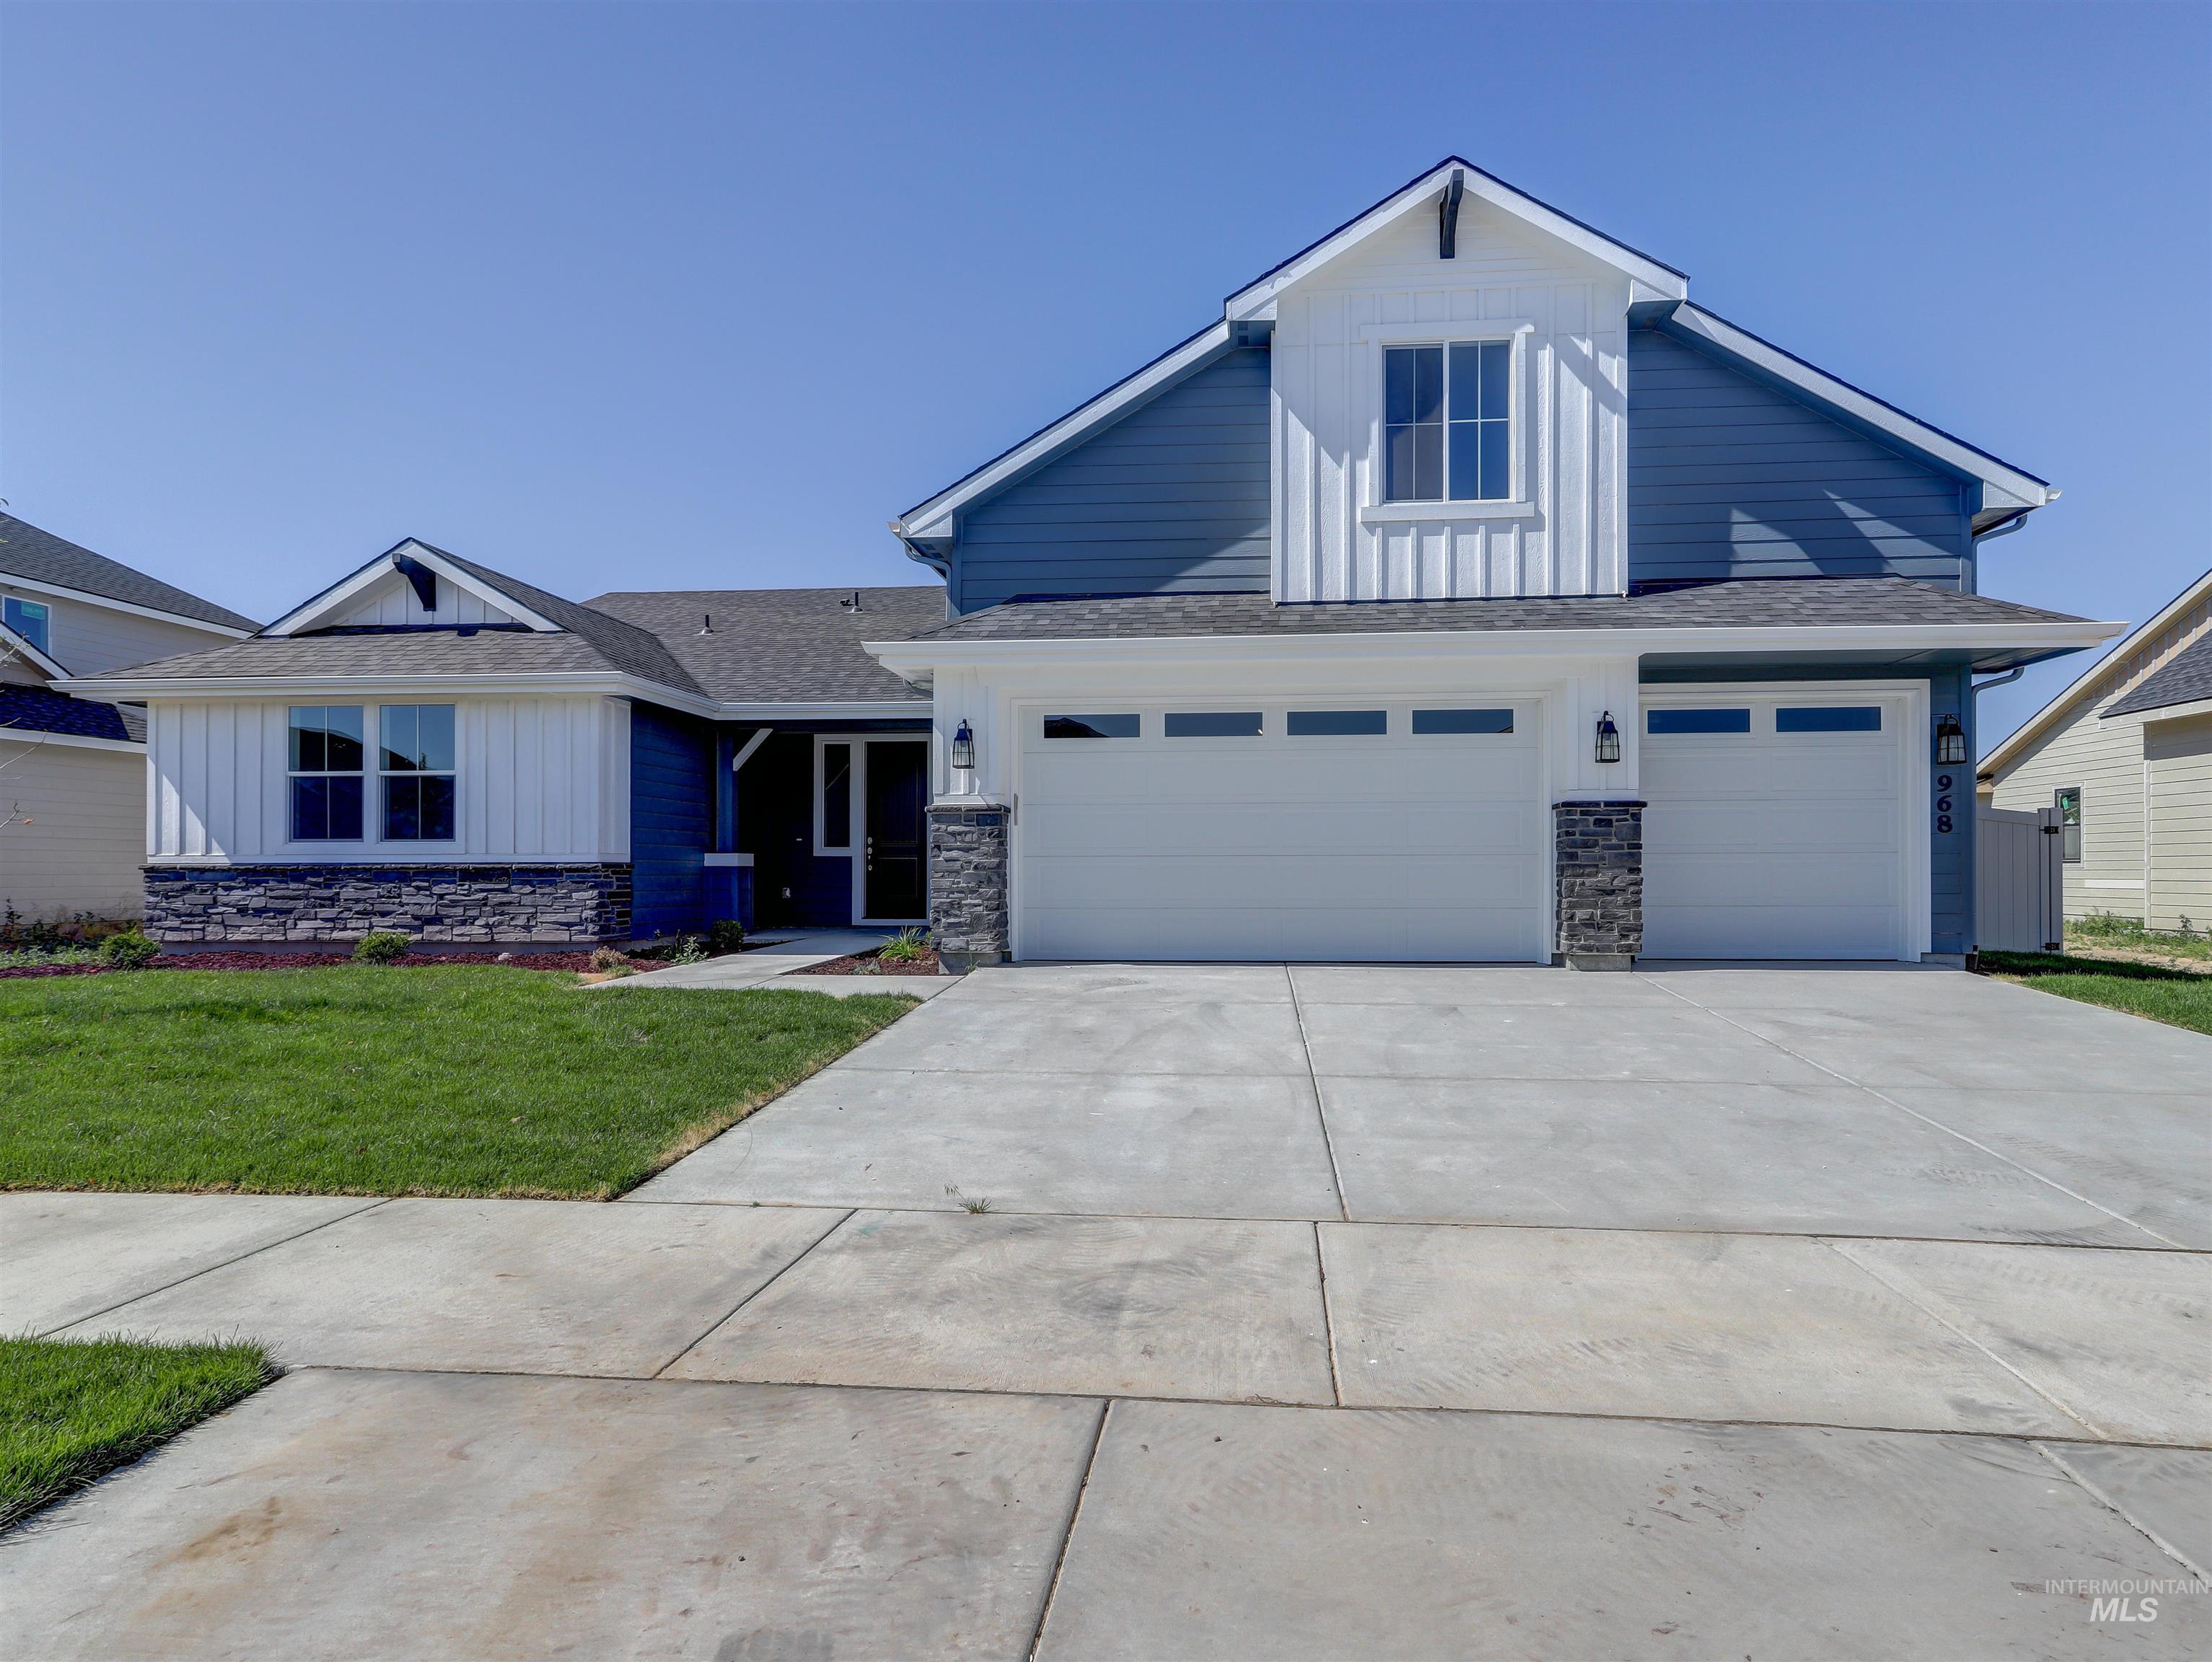 968 E Sweet Pearl St., Kuna, Idaho 83634, 3 Bedrooms, 3.5 Bathrooms, Residential For Sale, Price $703,000,MLS 98819548